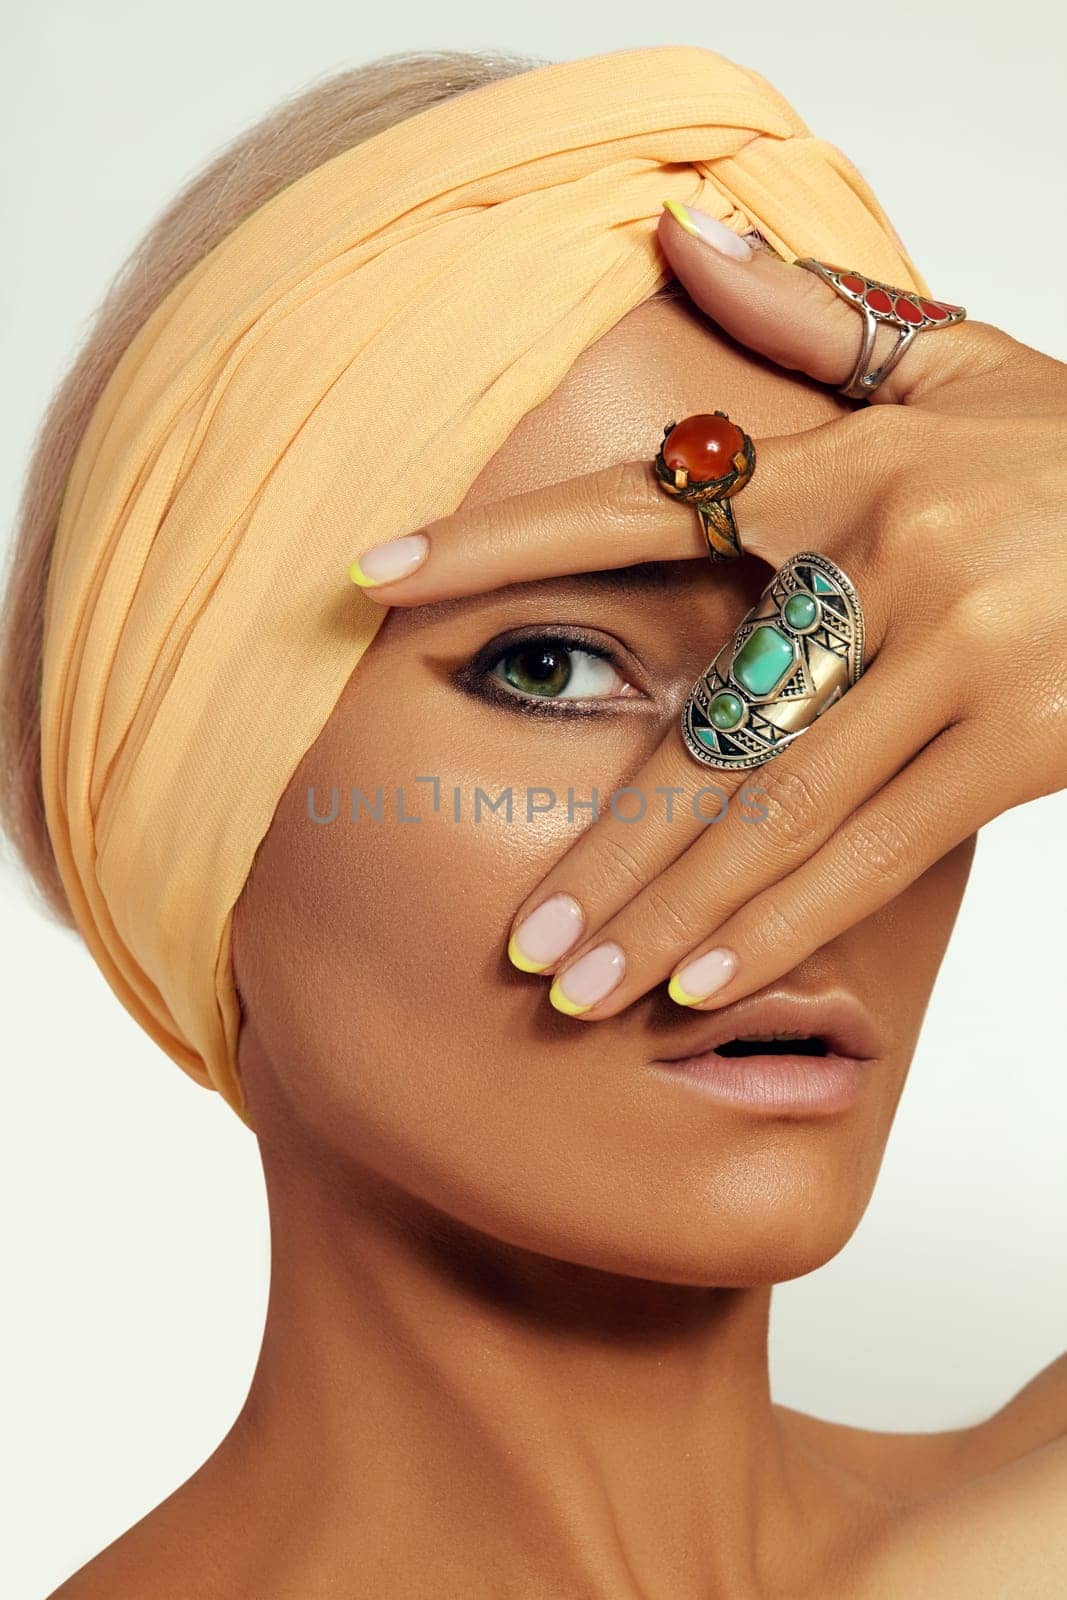 Beauty young Woman wearing Turban. Oriental Boho Style with Bohemian Accessories, Beautiful Rings, Fashion Make-up. Tanned Smooth Skin, Dark Arabian Makeup, Luxury Jewelry Rings and Perfect Manicure